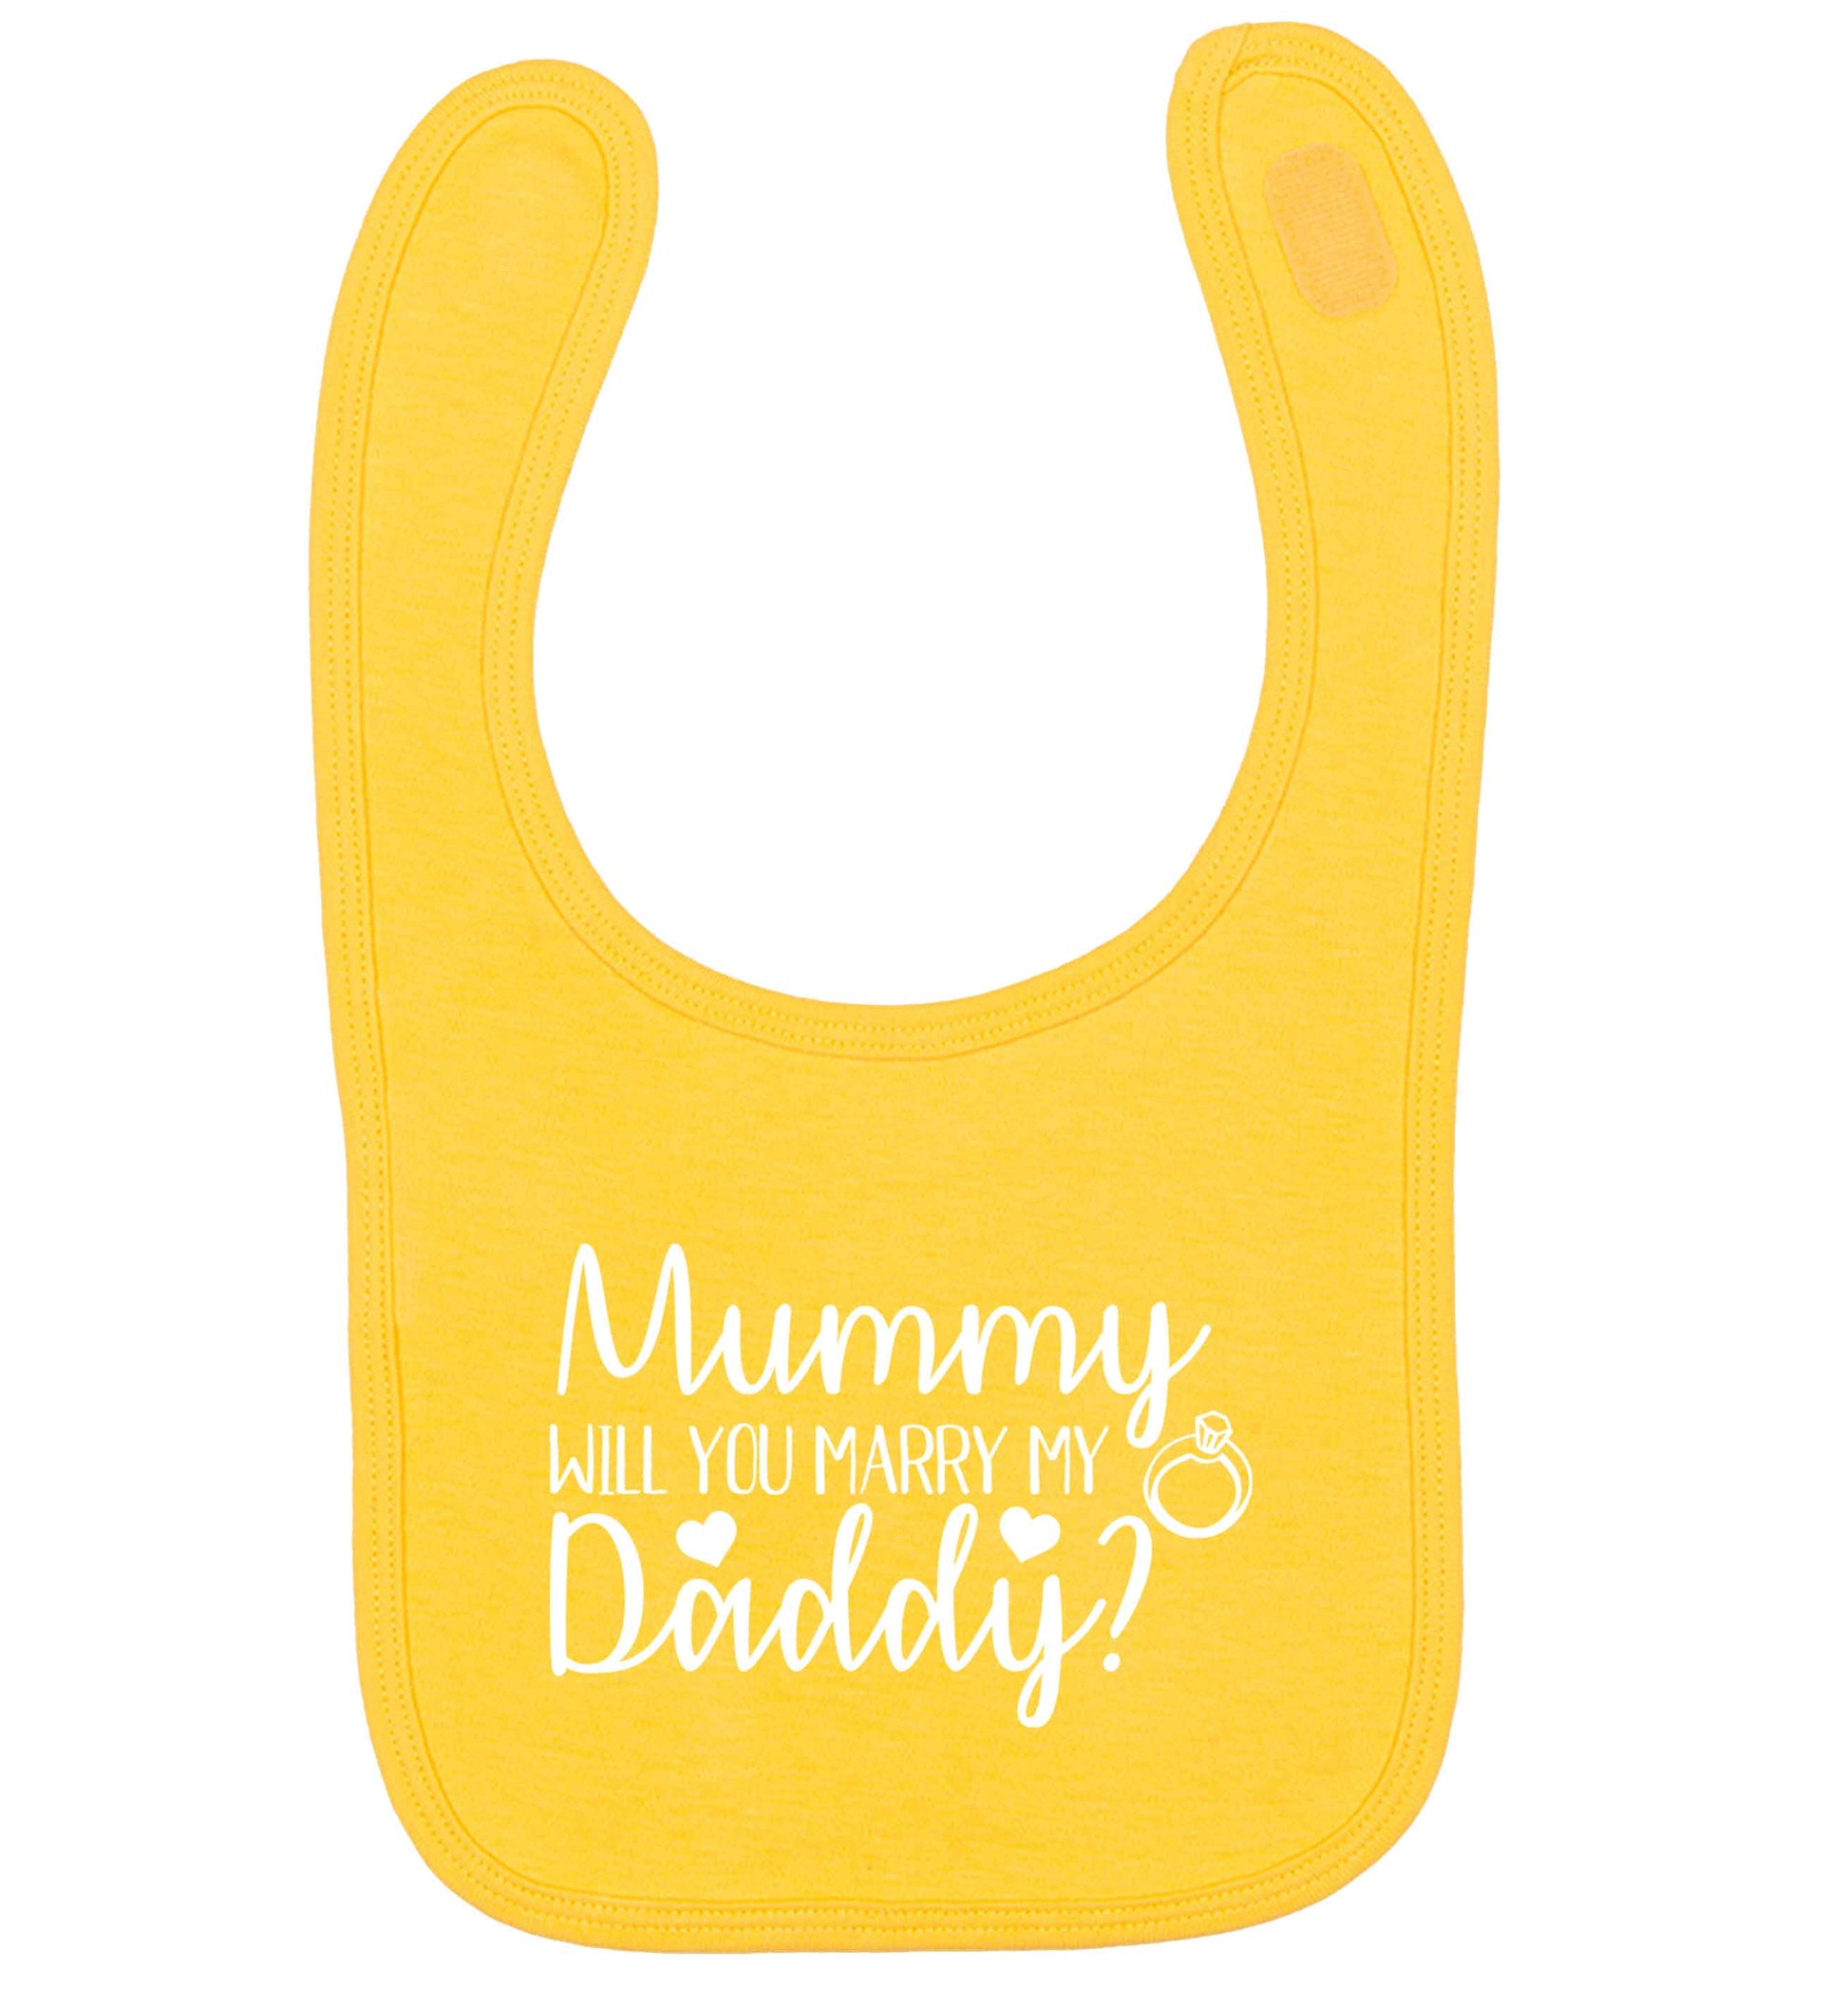 Looking for a unique way to pop the question? Why not let your kids do it!  yellow baby bib